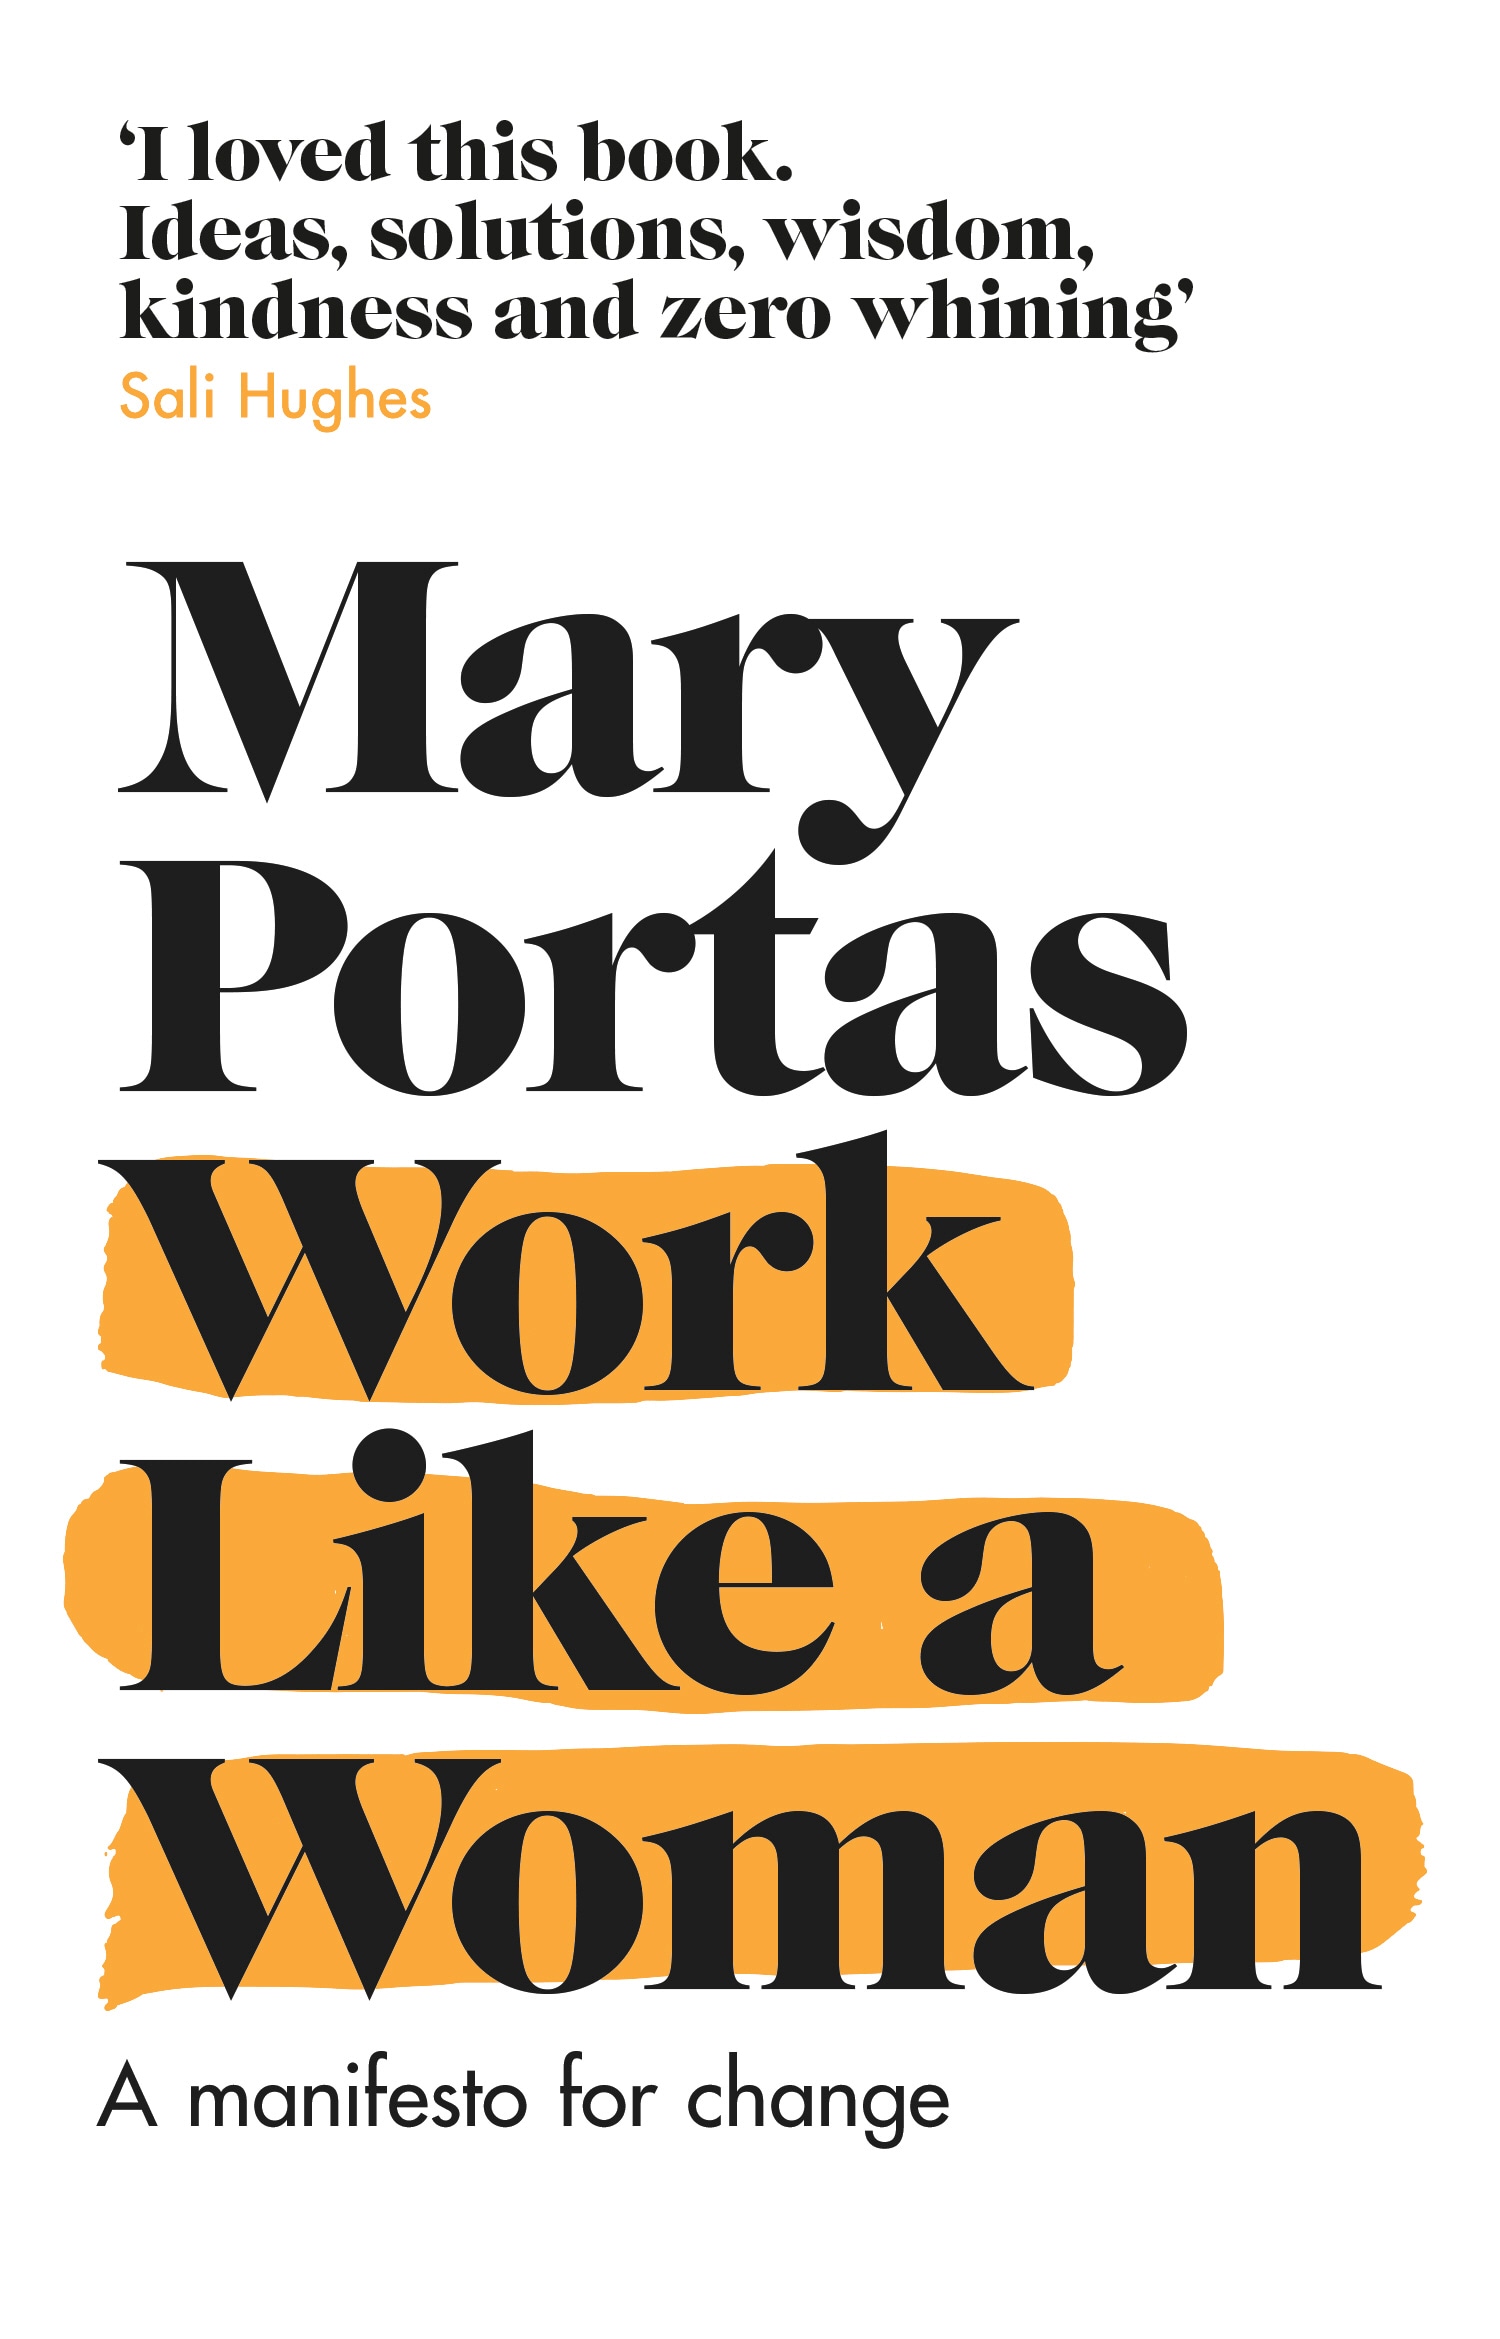 Book “Work Like a Woman” by Mary Portas — May 9, 2019